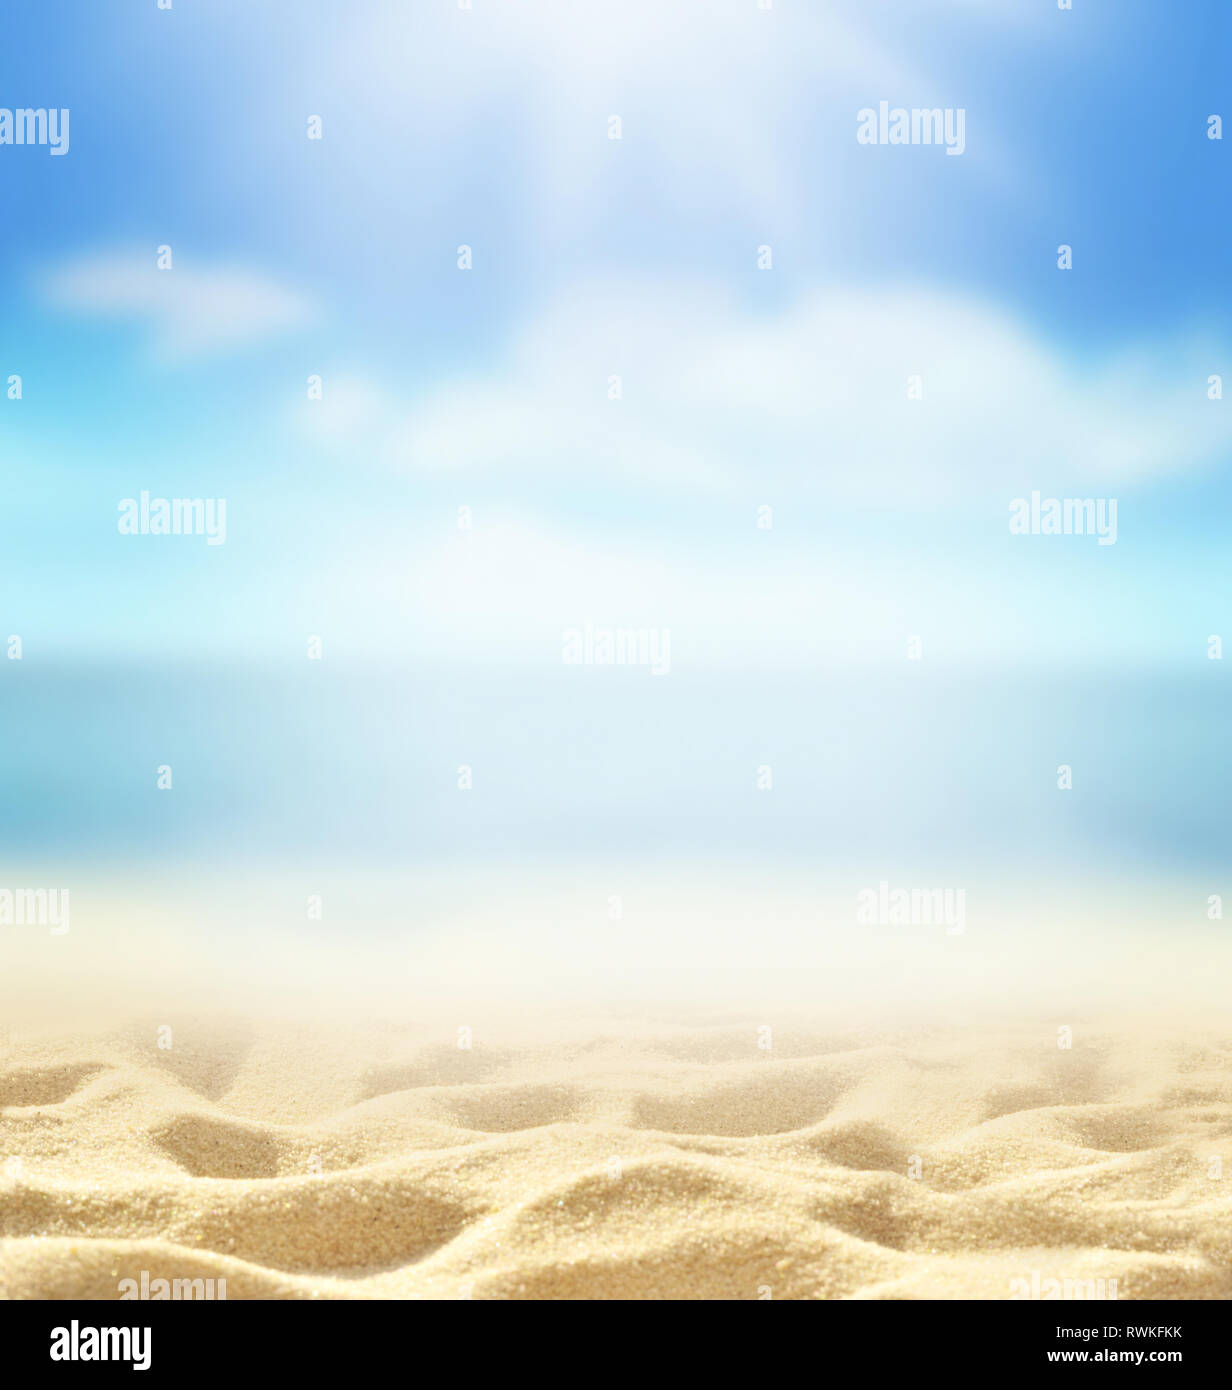 Summer beach background. Sand and sea and sky. Summer concept. Stock Photo